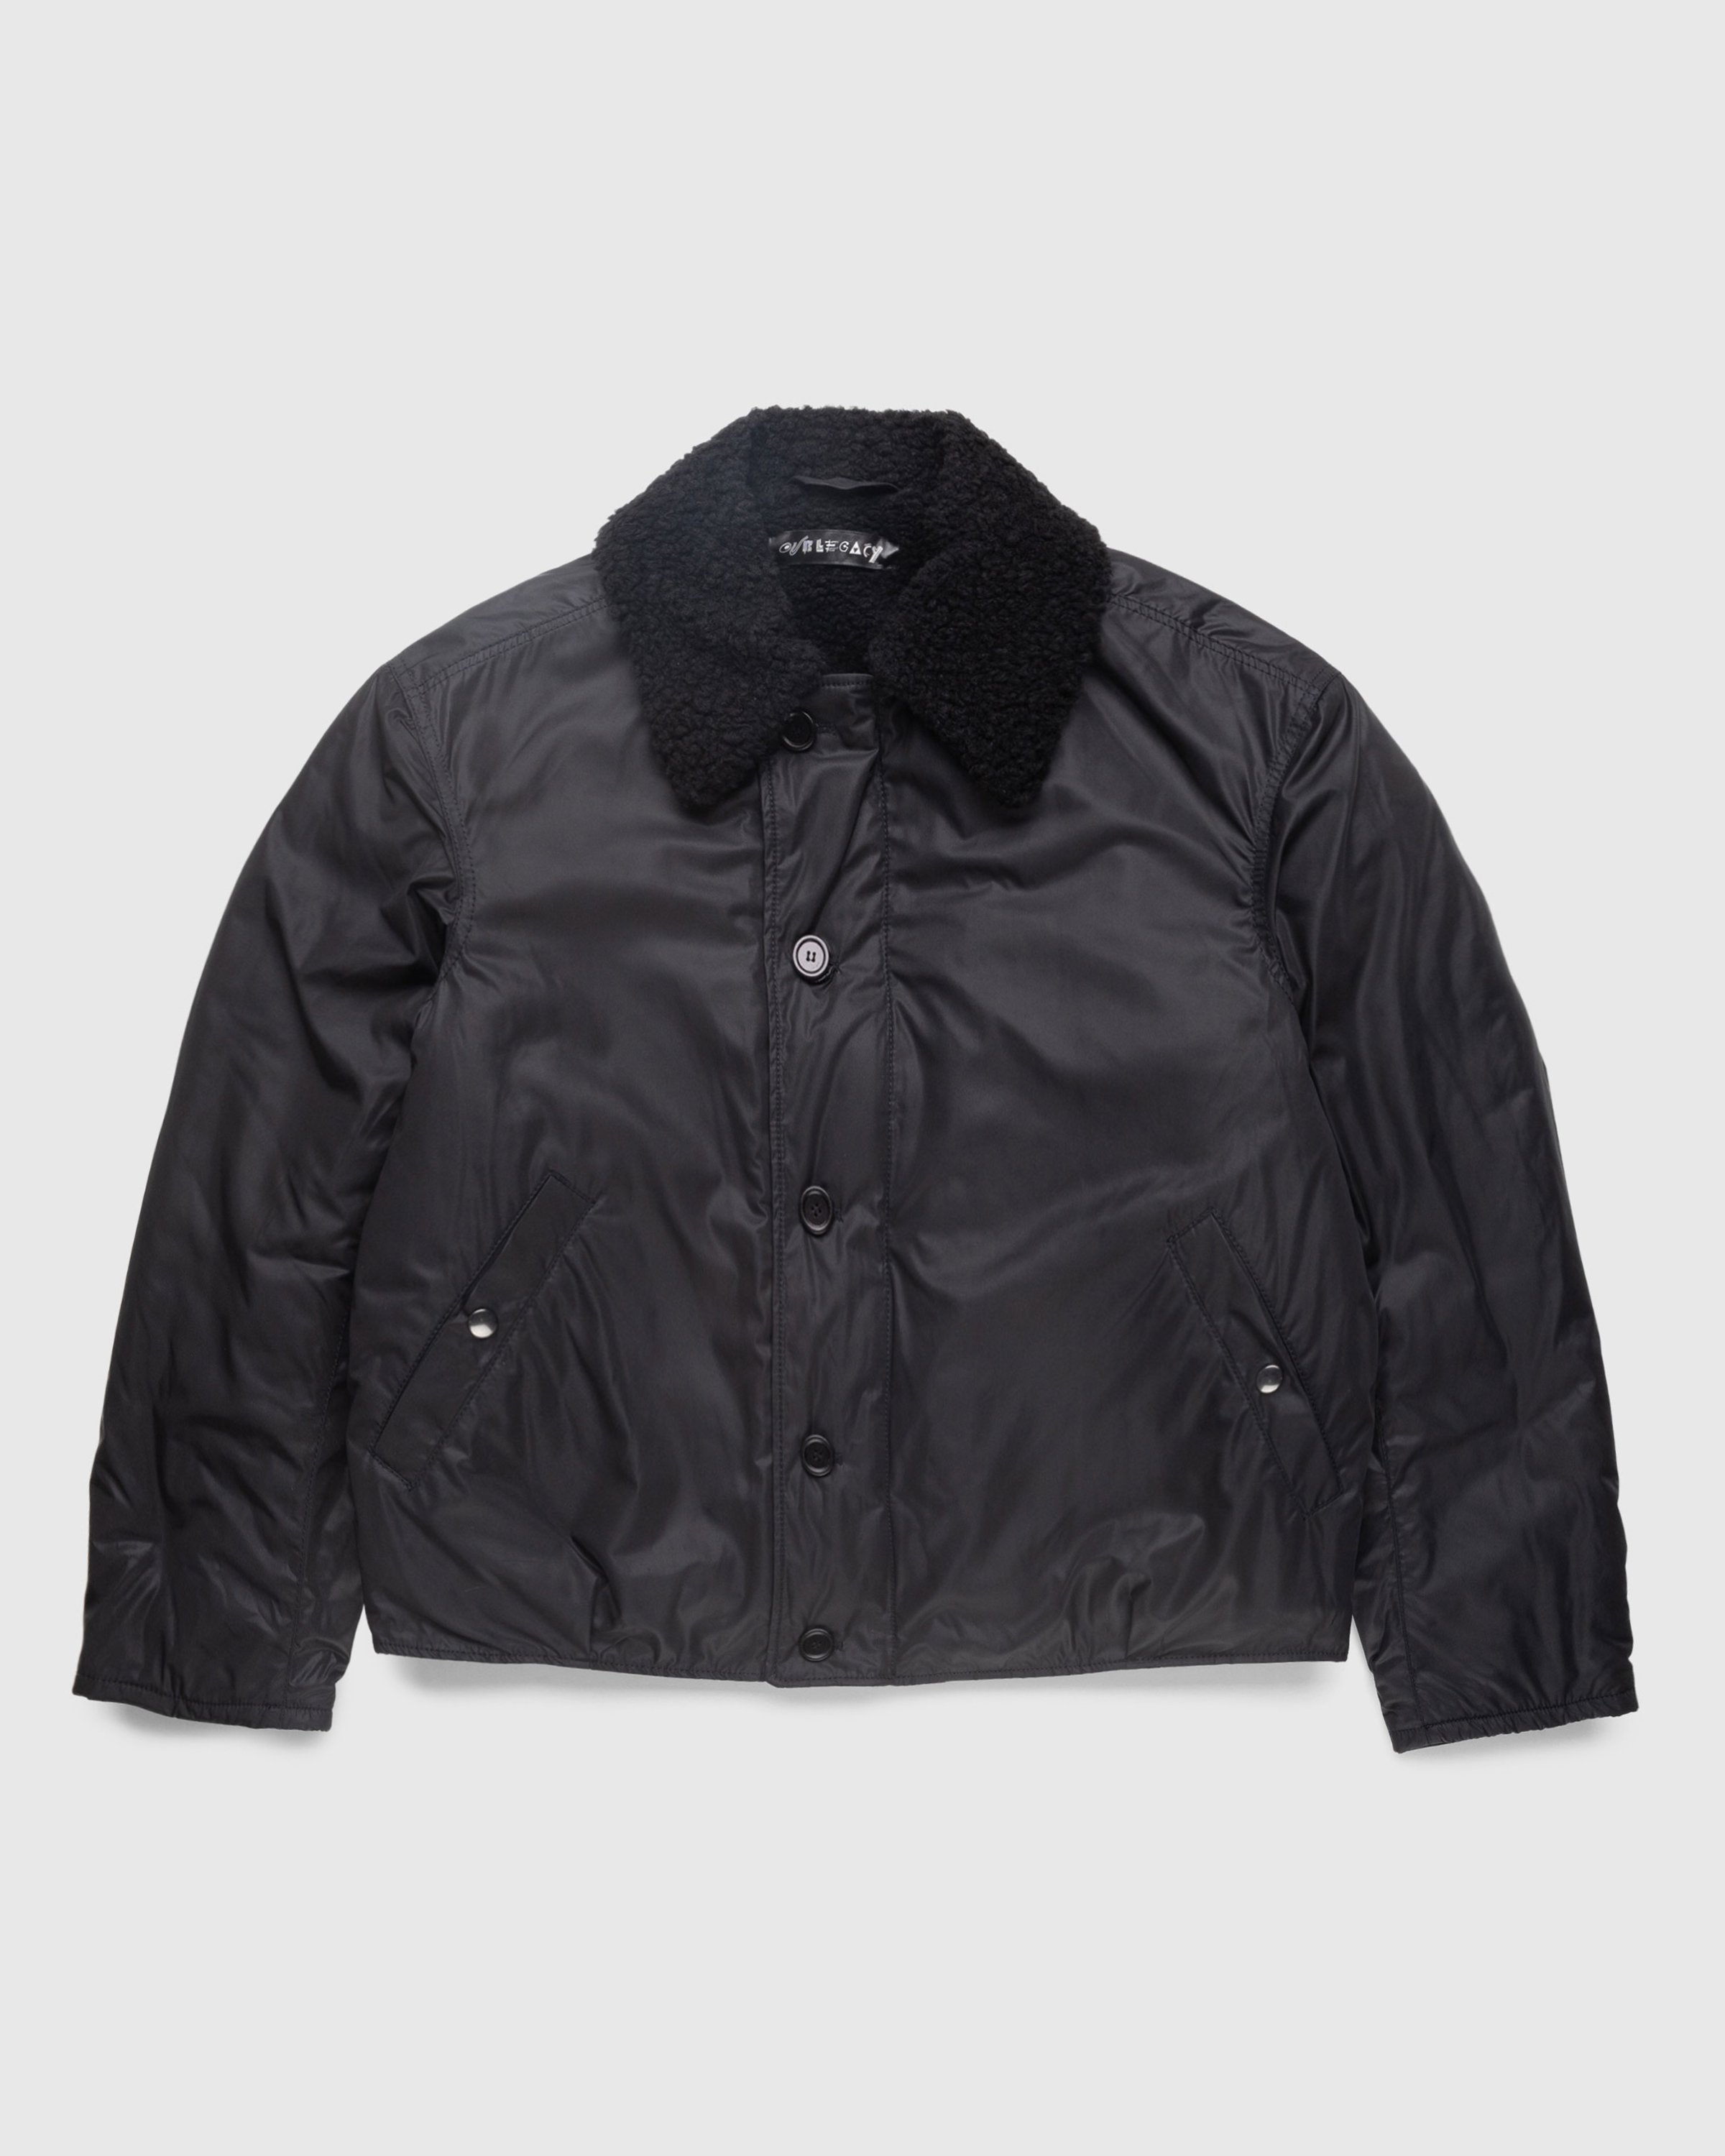 Our Legacy - GRIZZLY JACKET Black - Clothing - Black - Image 1